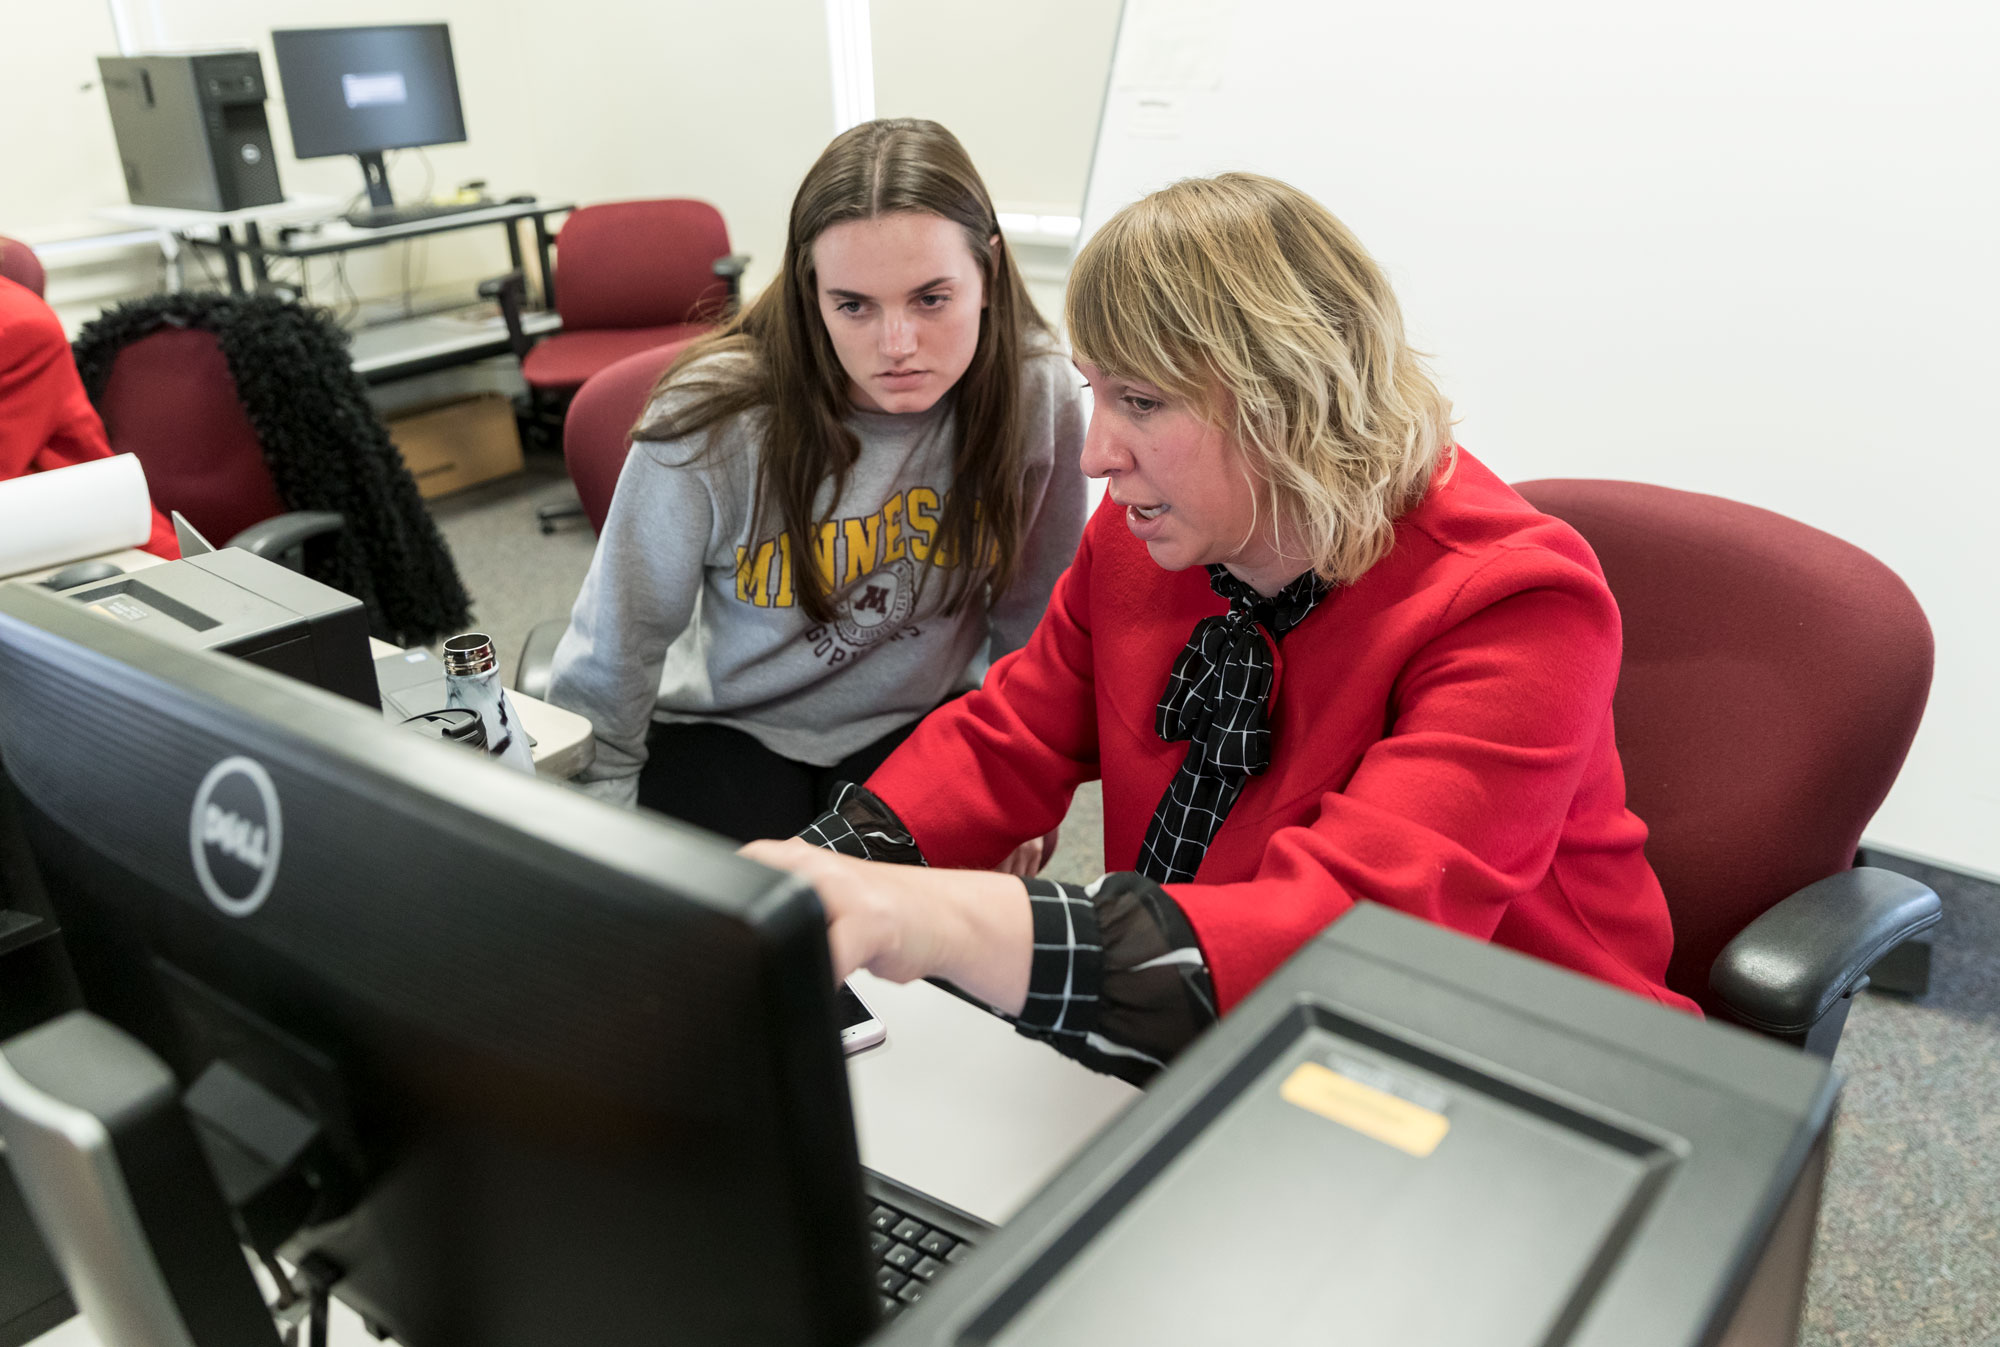 Professor Linsey Griffen working with an Apparel Design student in the computer lab